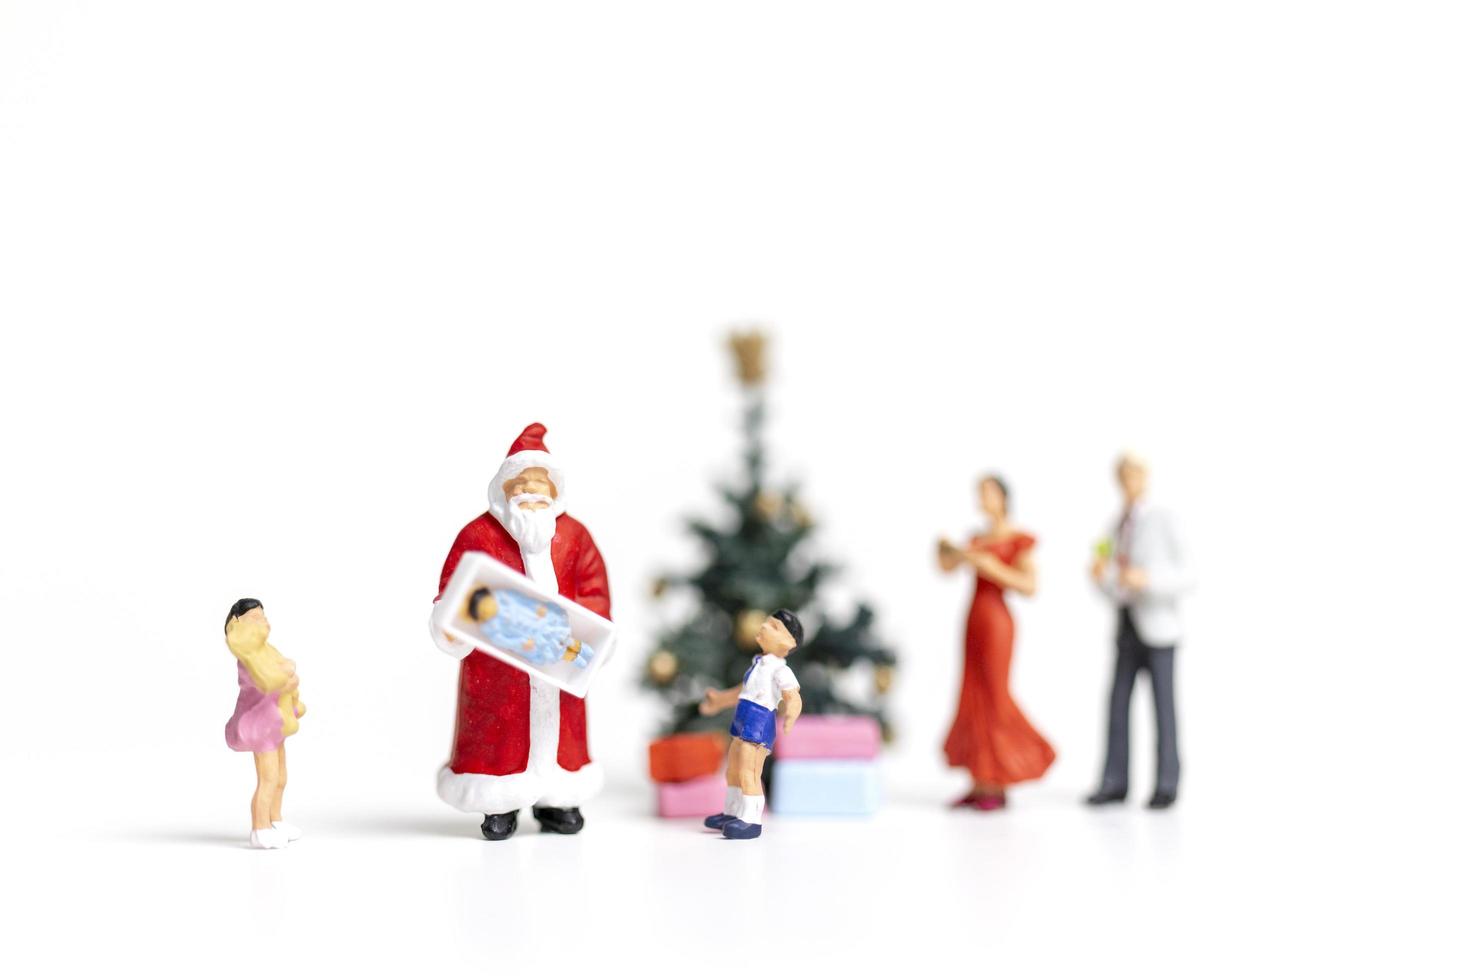 Miniature Santa Claus holding gifts for a happy family, Christmas and Happy New Year concept photo